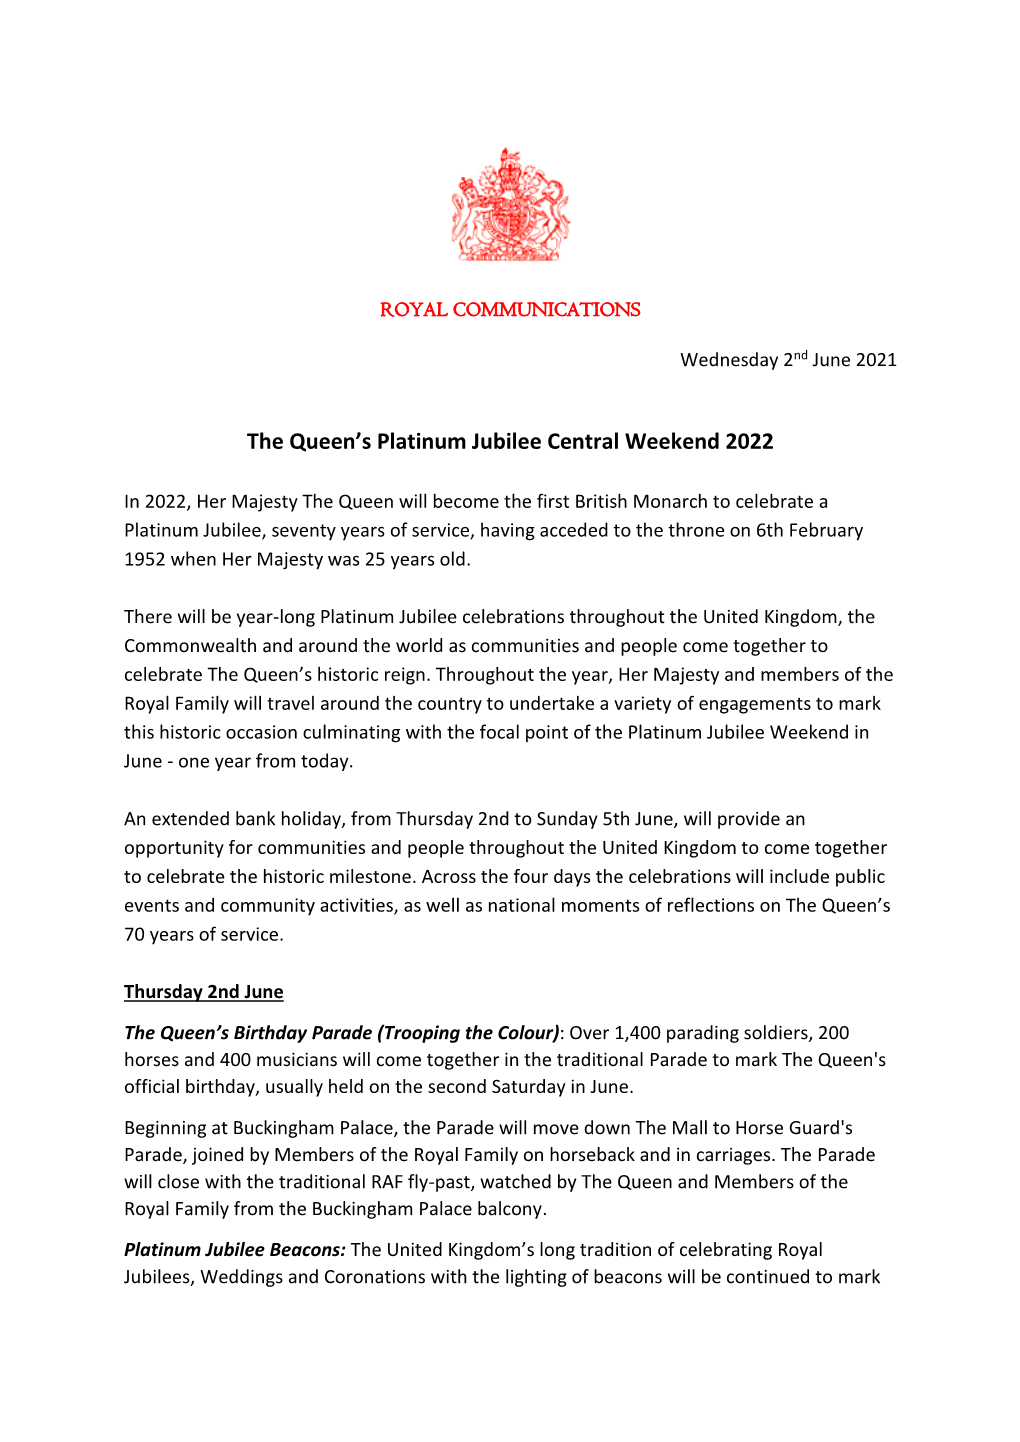 The Queen's Platinum Jubilee Central Weekend 2022